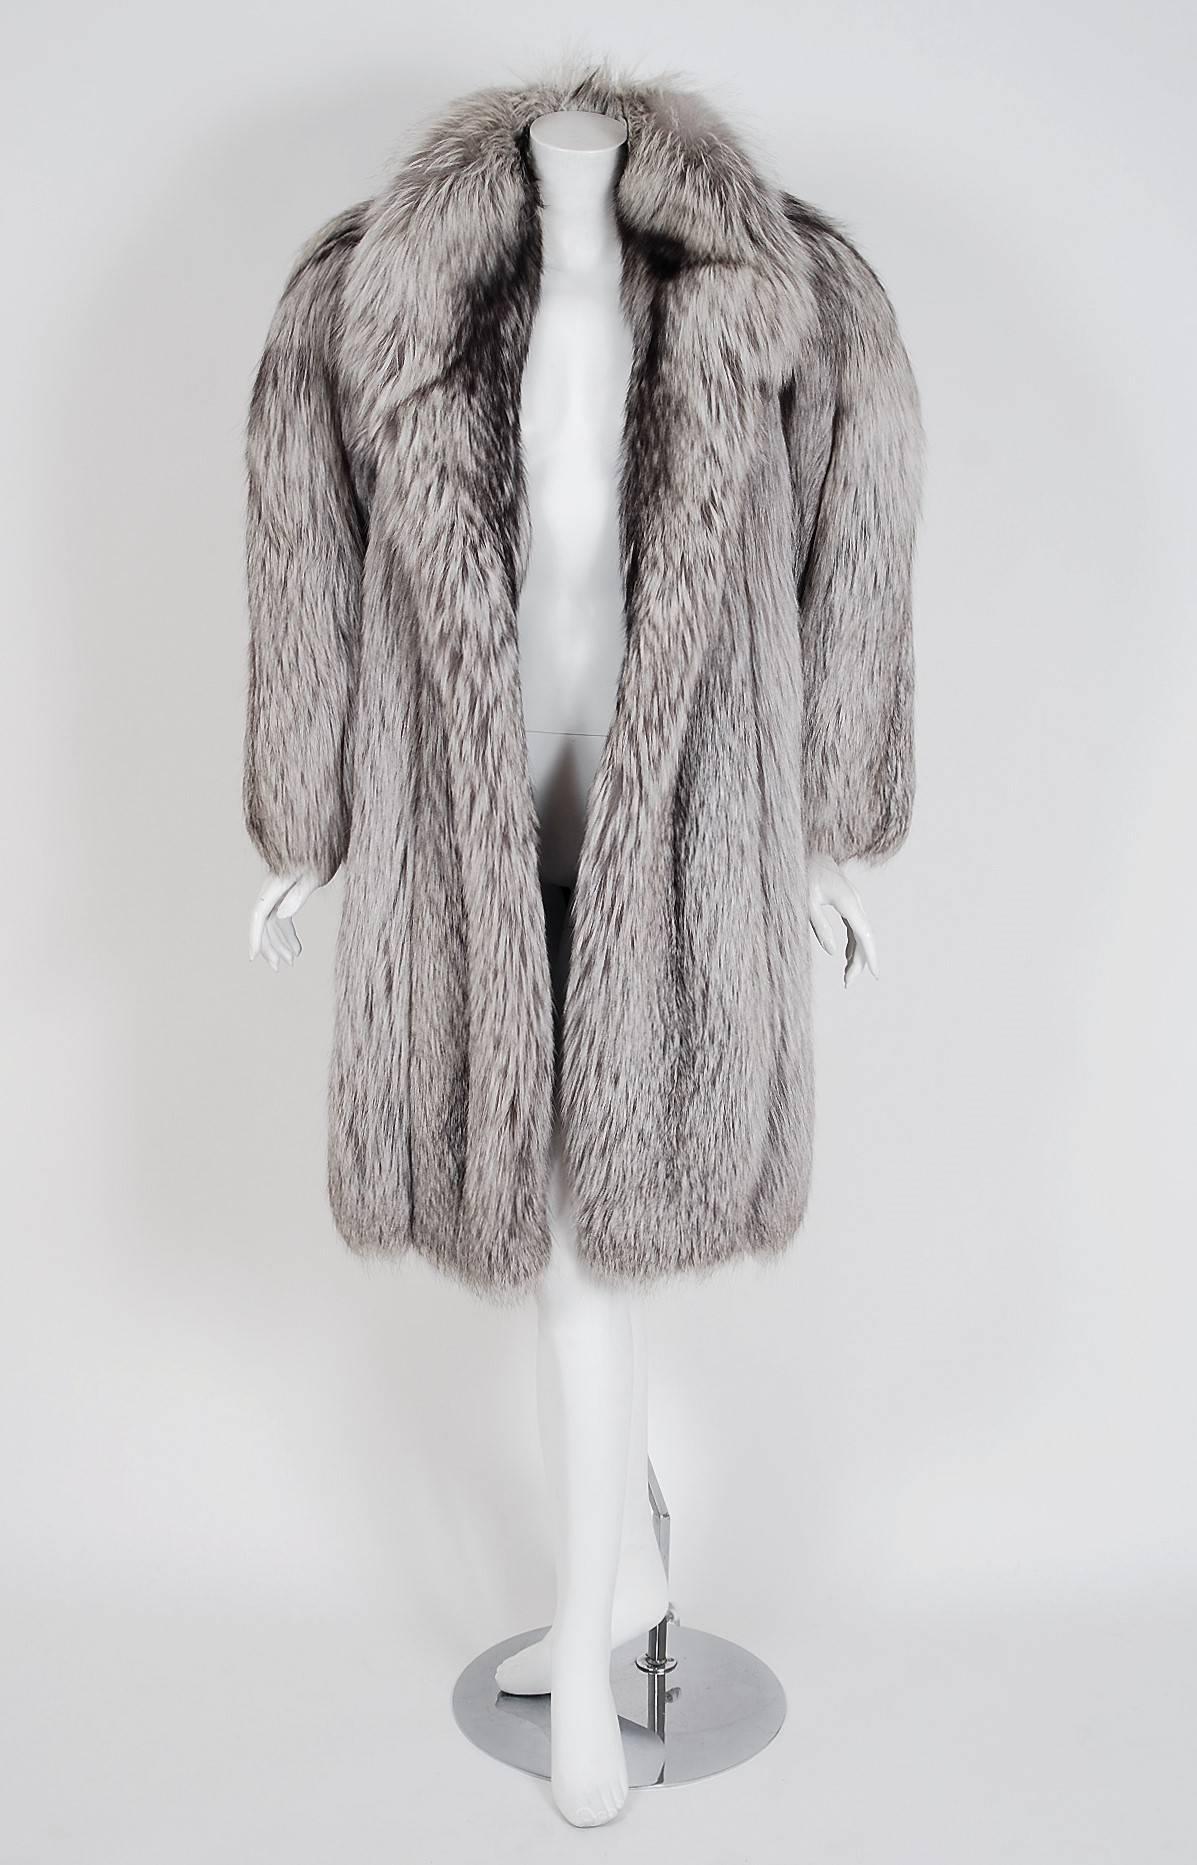 Breathtaking Yves Saint Laurent Fourrures genuine silver-fox coat from his 1971 Fall/Winter collection. Such a rarity to find in such pristine condition! It is insanely chic with its easy-to-wear style yet dramatic silhouette. The level of quality